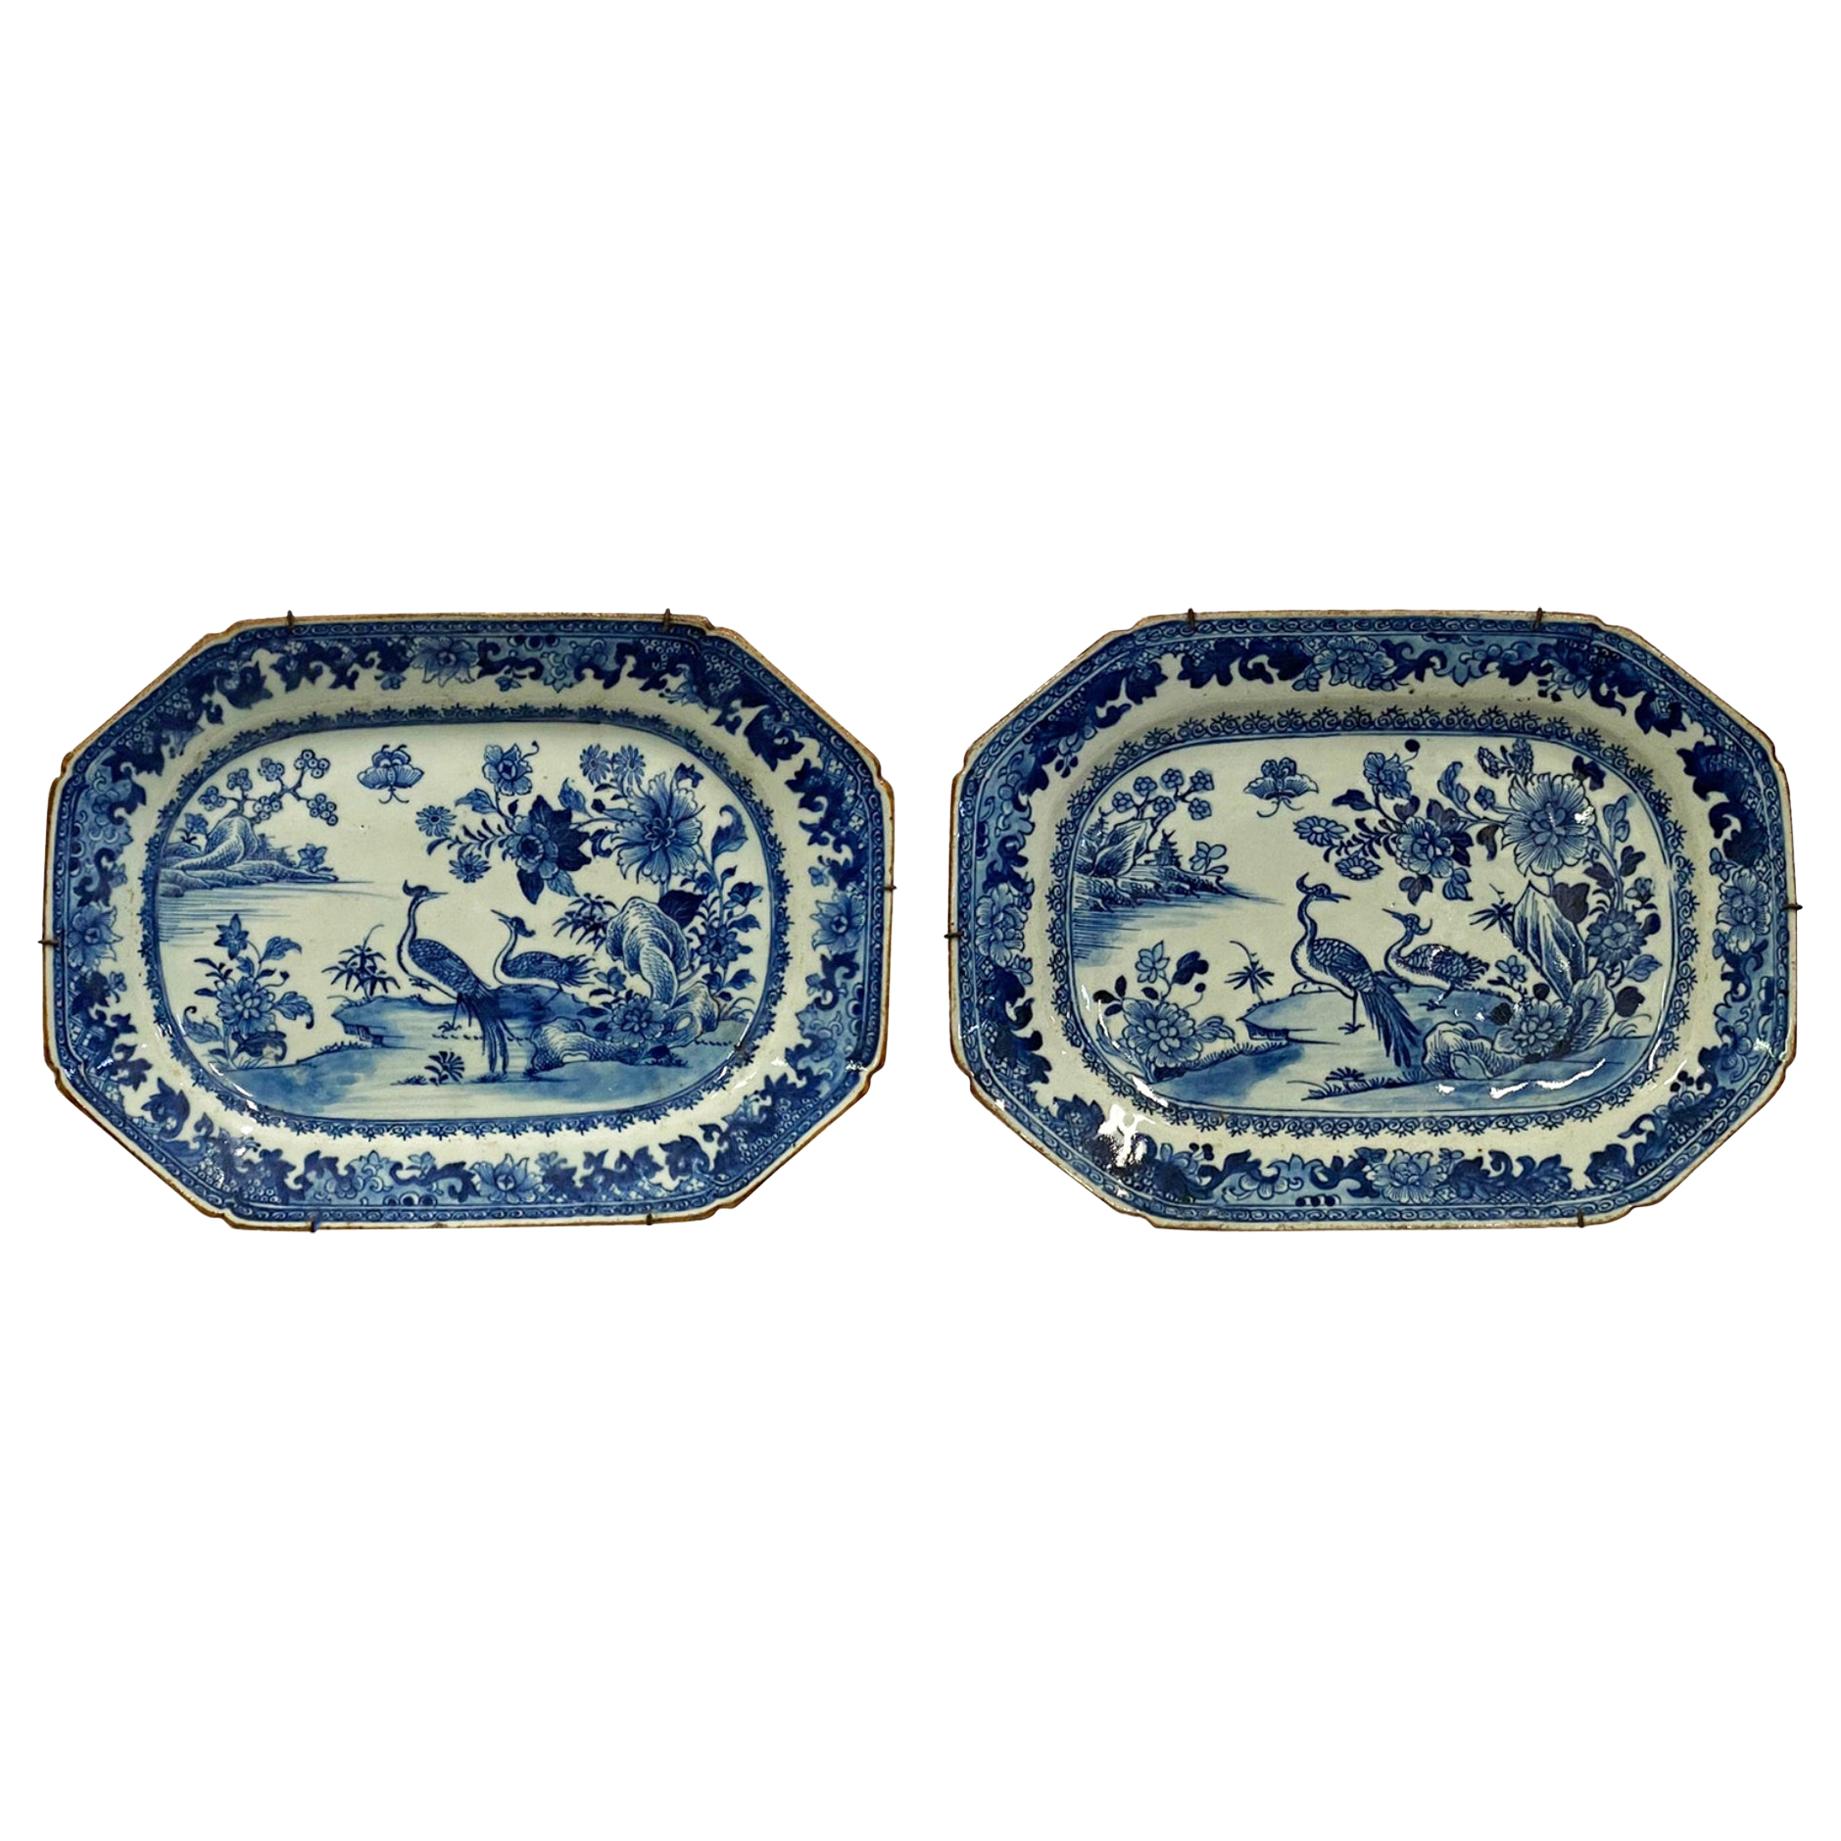 Pair of Chinese Nanking Blue and White Platers, 18th Century